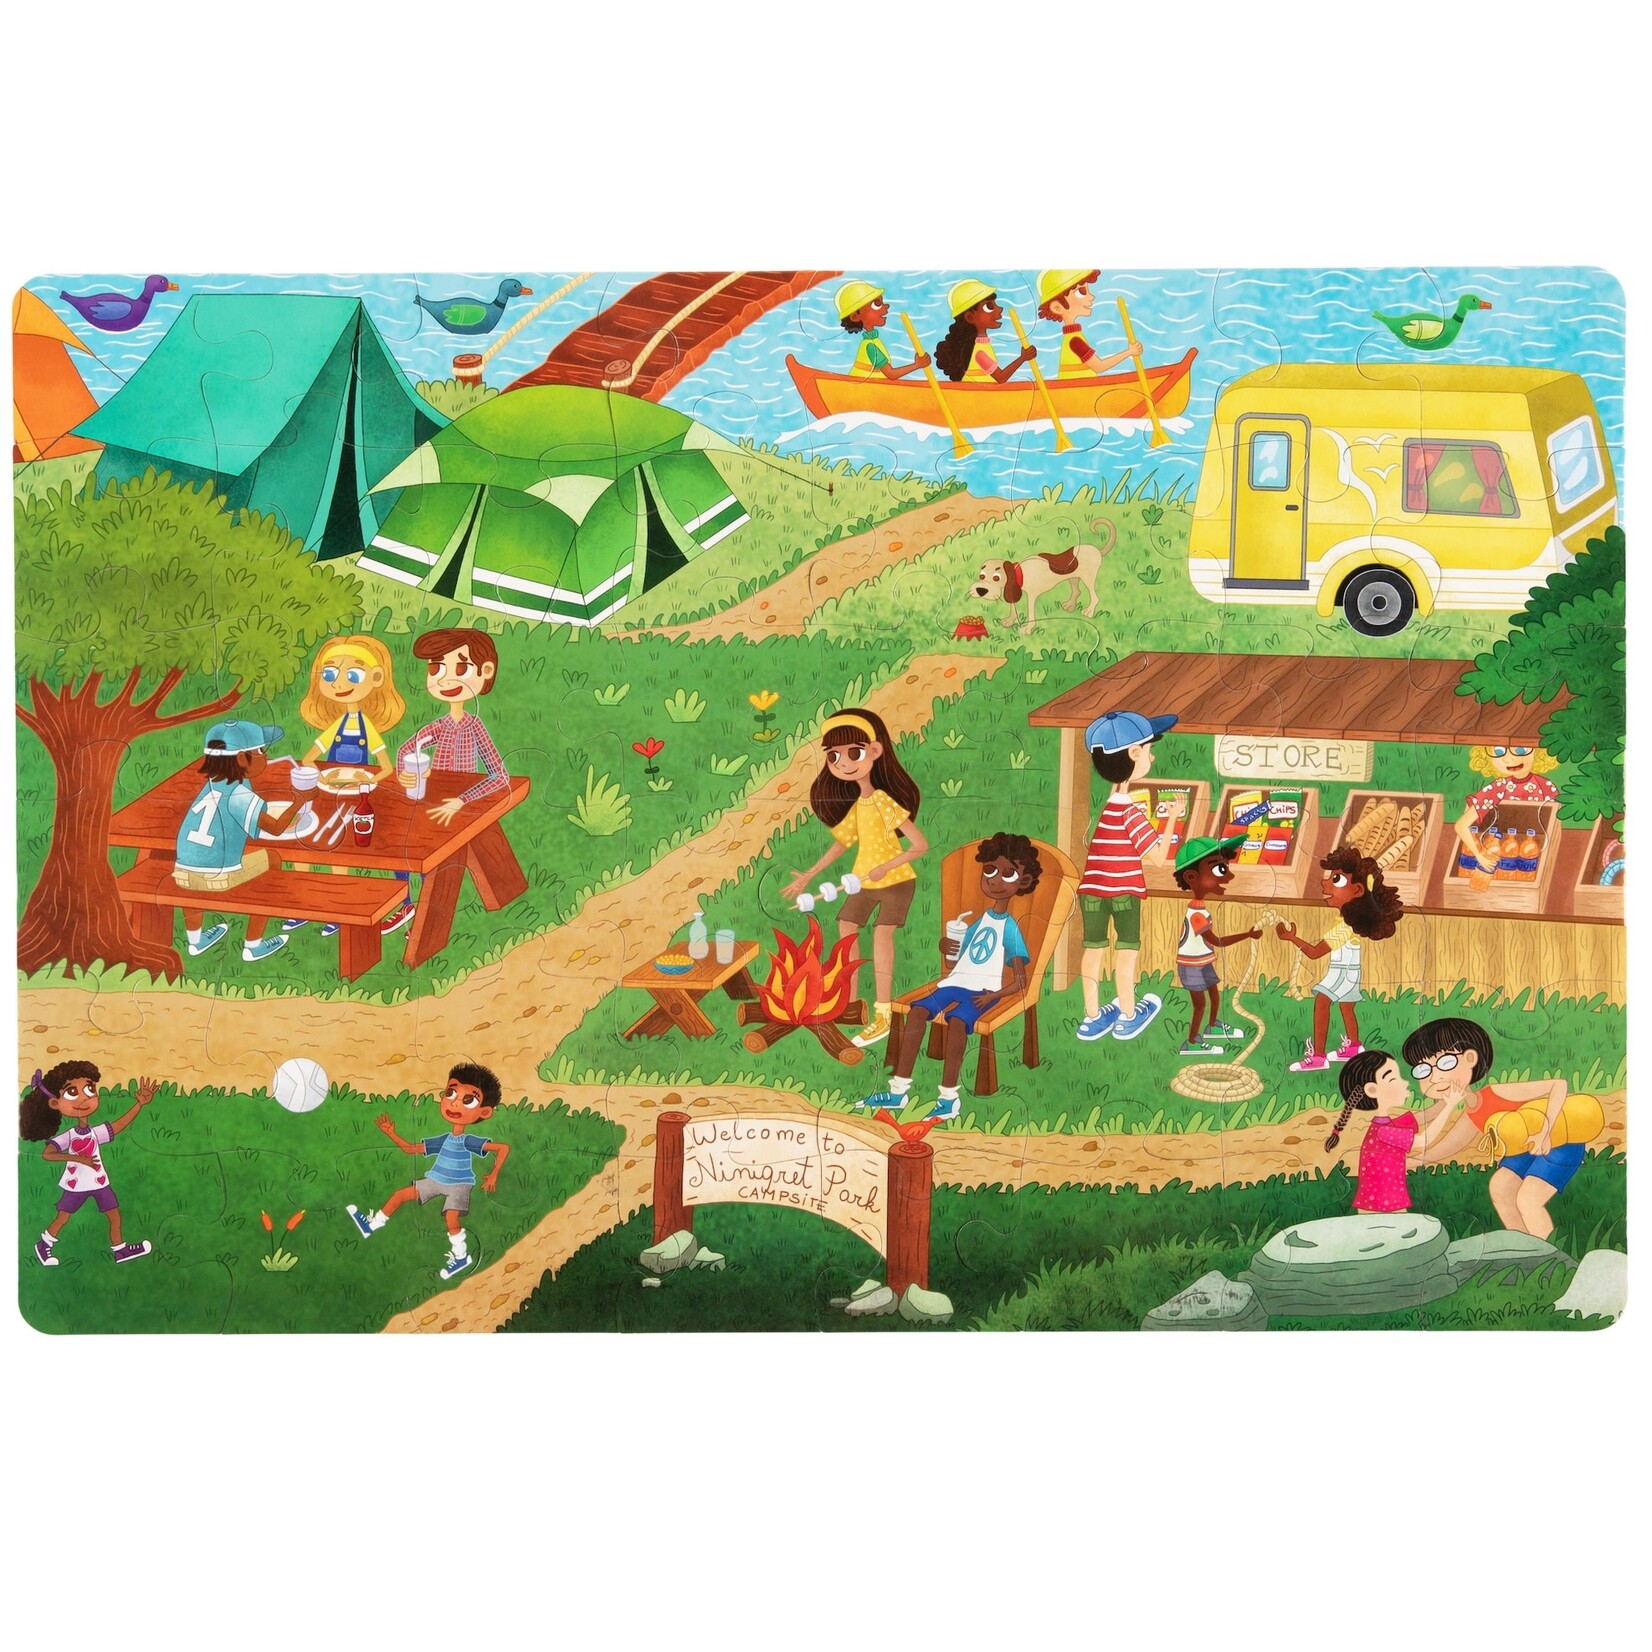 Upbounders Camping Outdoors 48 Piece Floor Puzzle